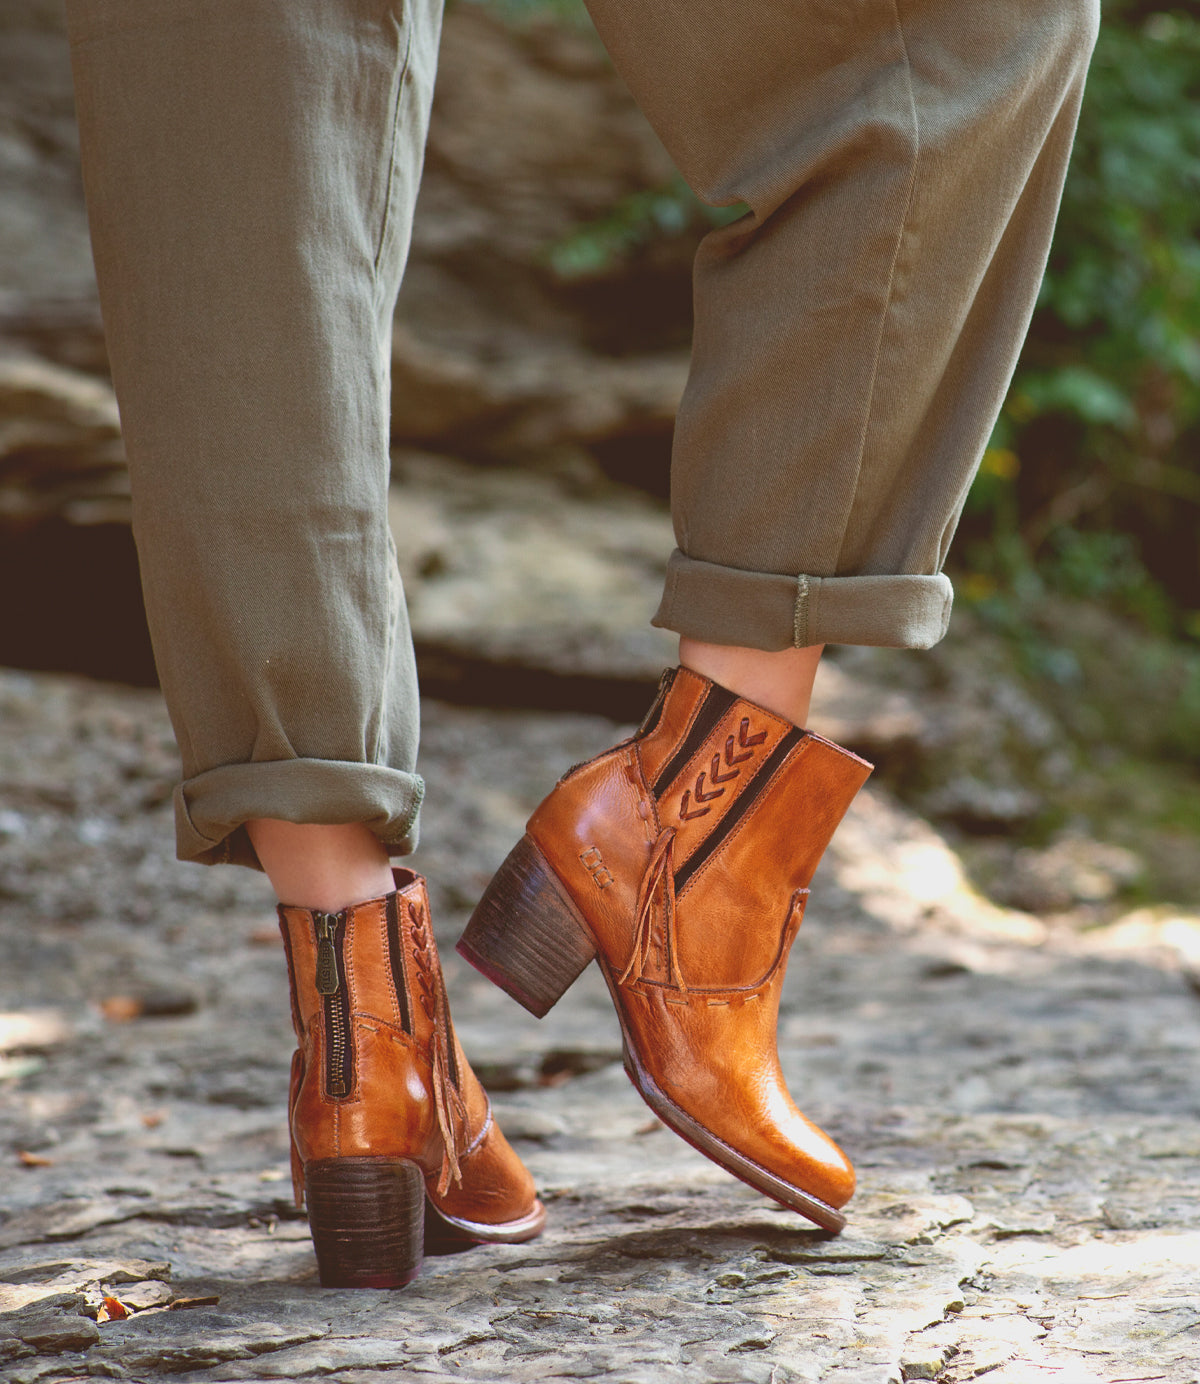 A woman's feet standing on rocks in a pair of Bed Stu Celestine boots.